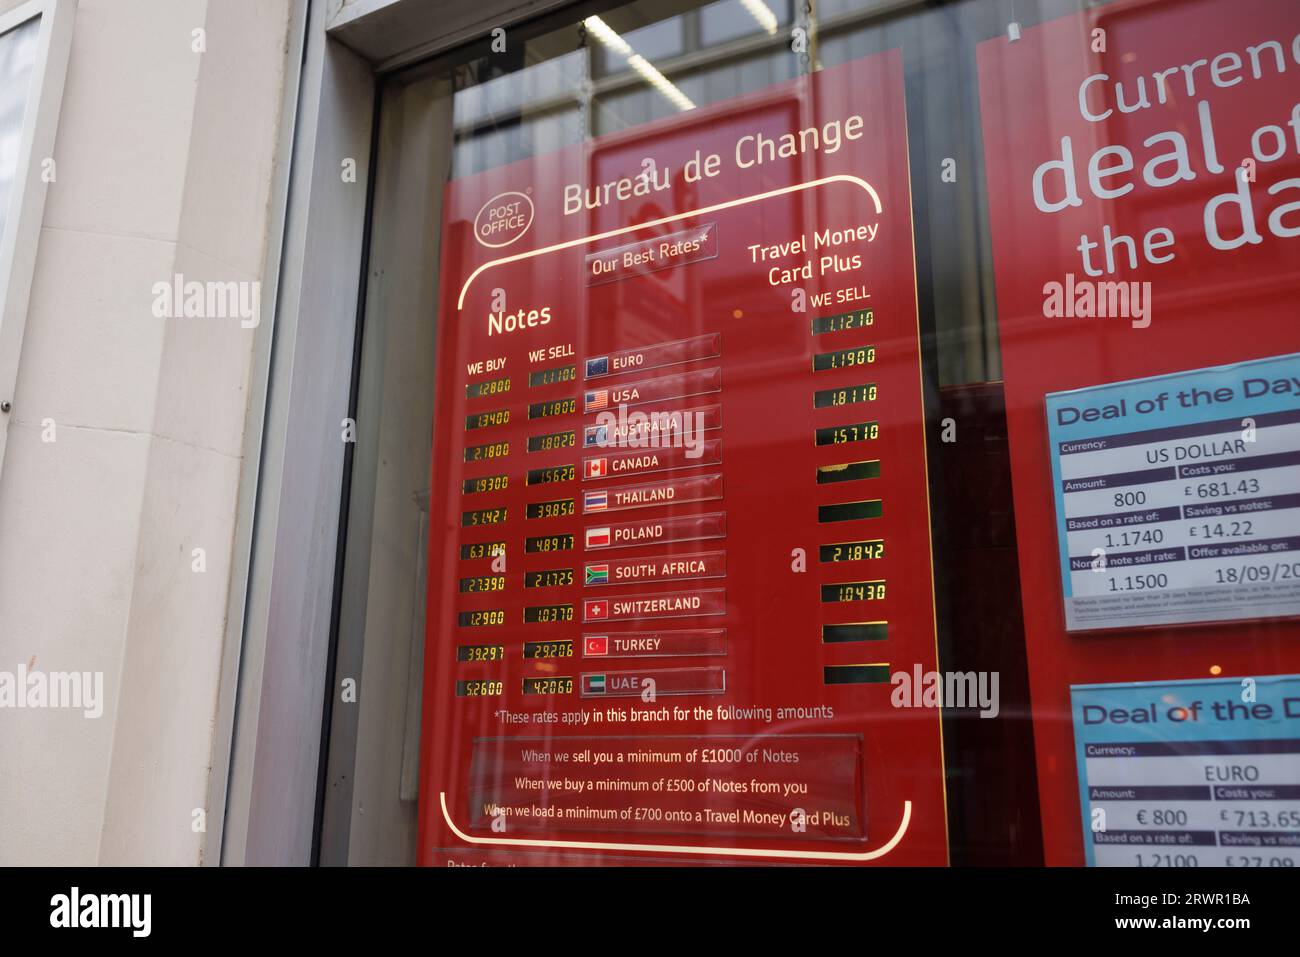 Bureau de Change display in the window of a post office in Central London. Stock Photo